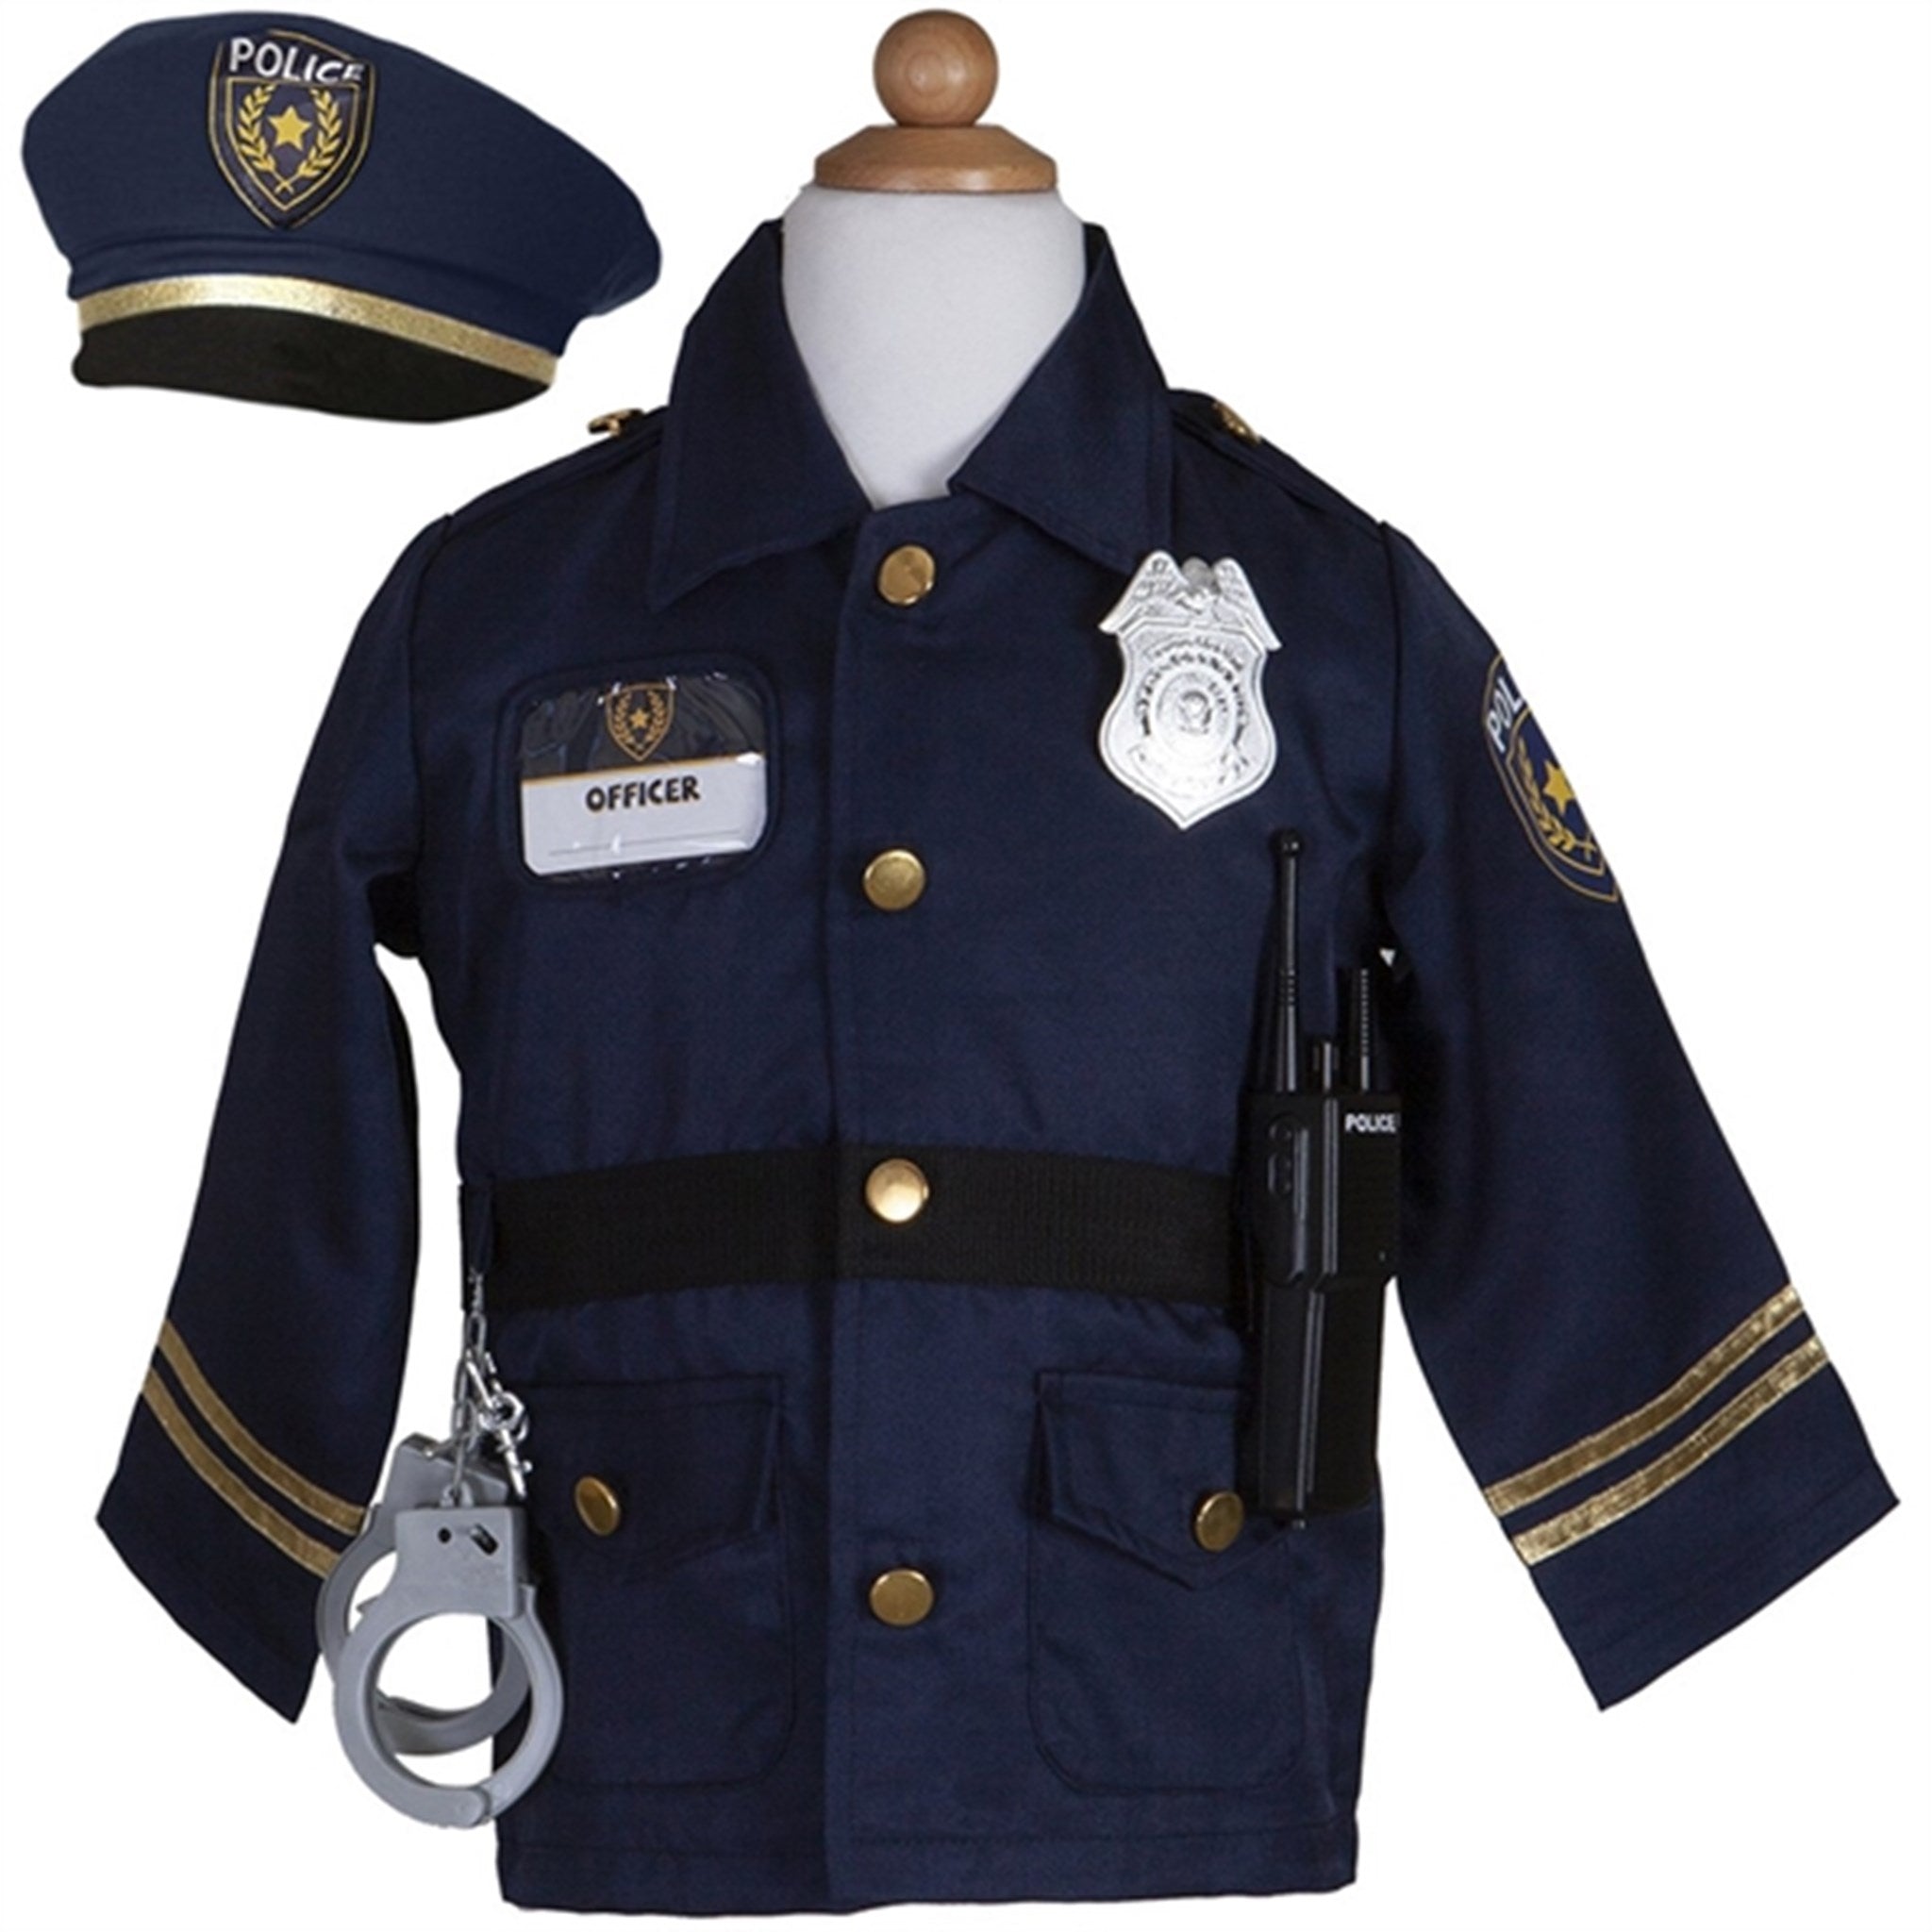 Great Pretenders Police Officer w. Accessories